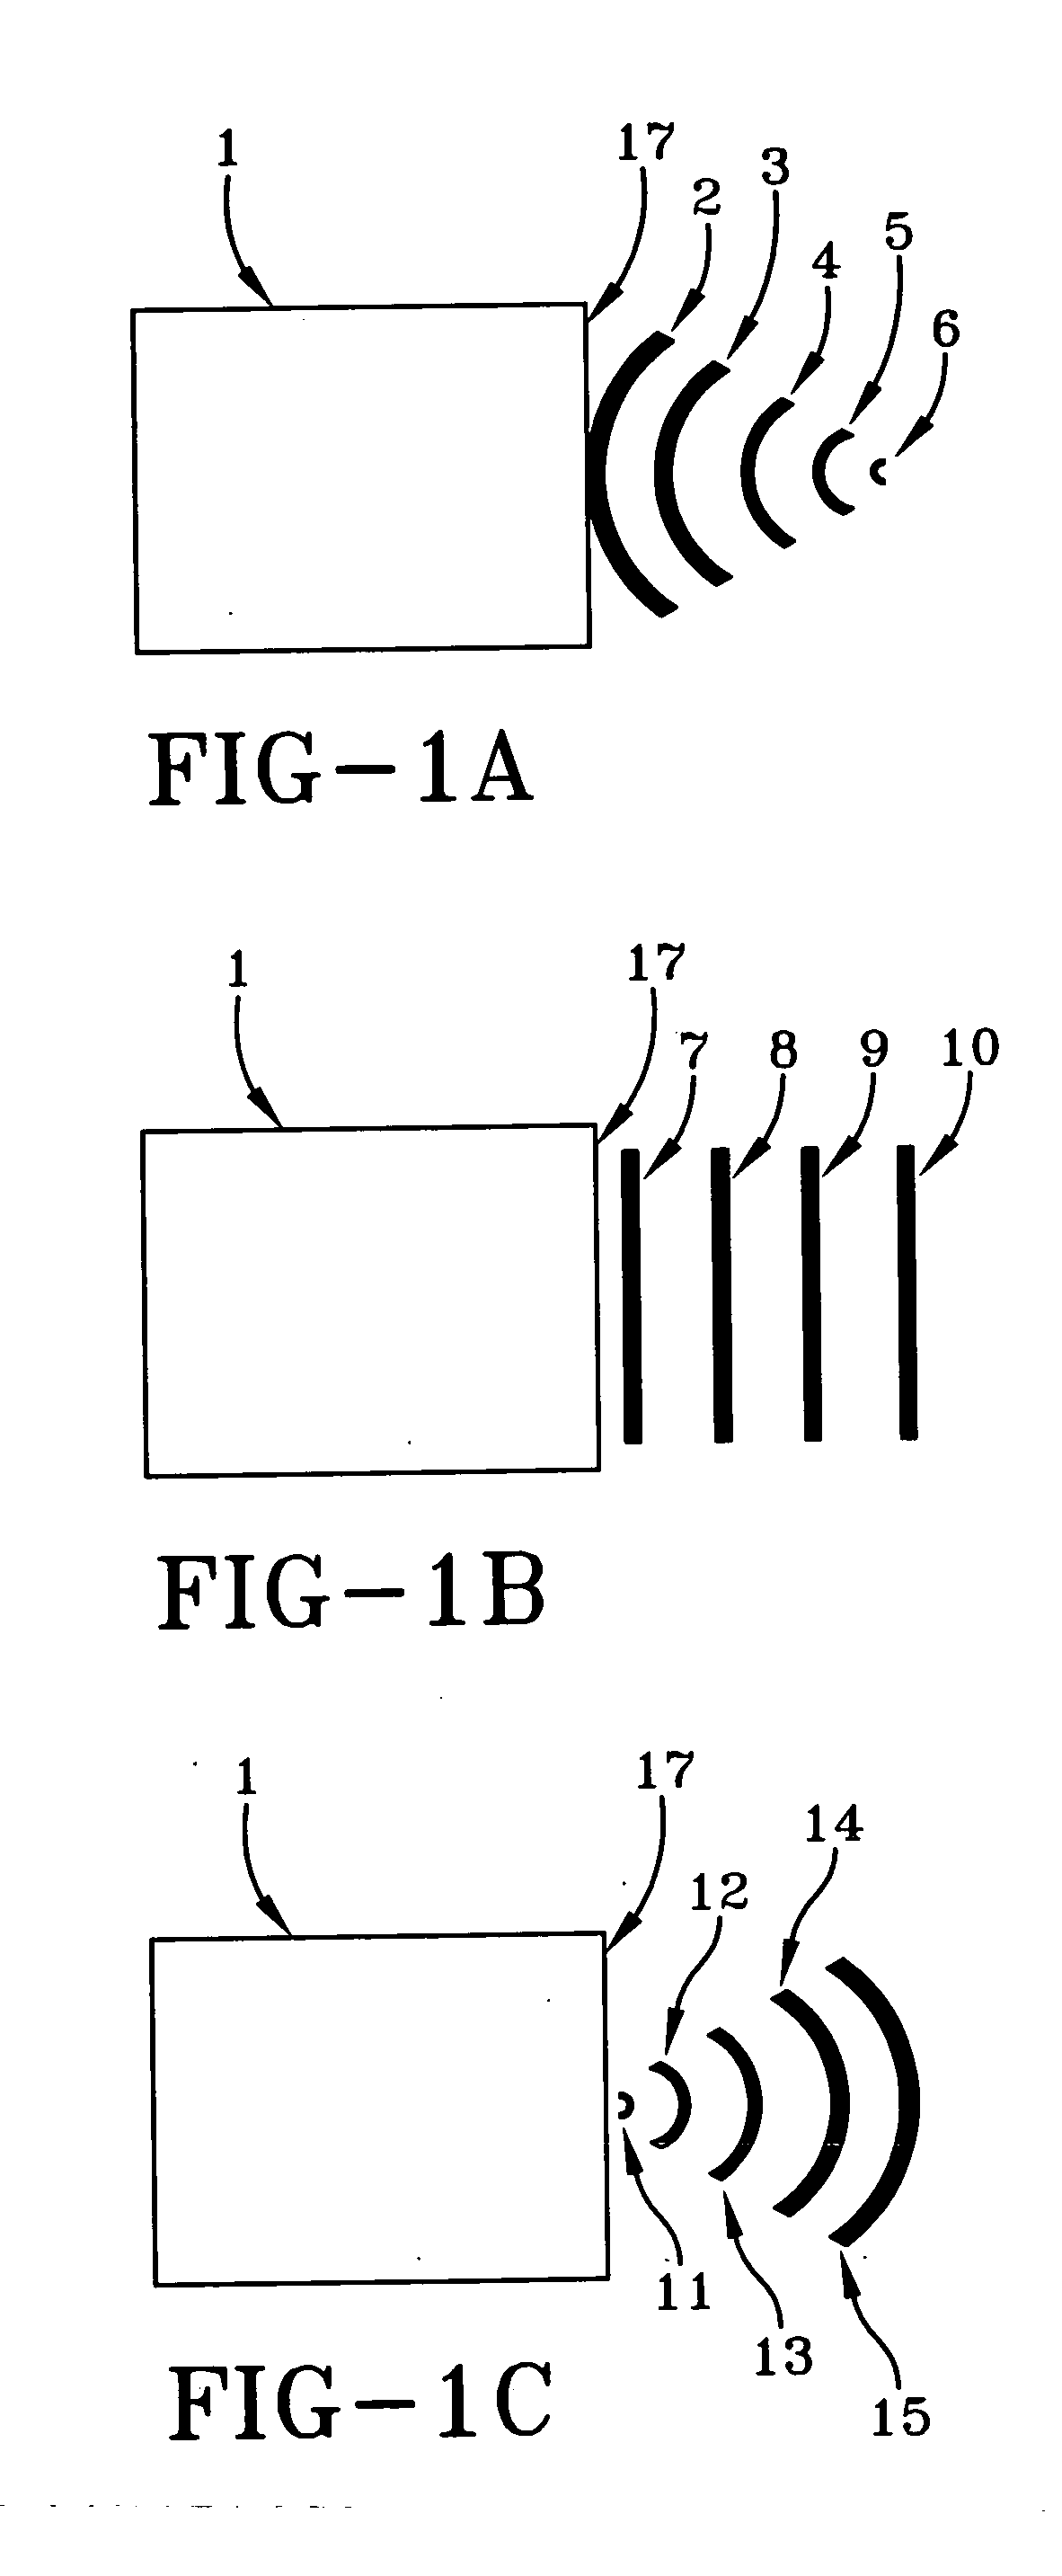 Method of treatment for and prevention of periodontal disease